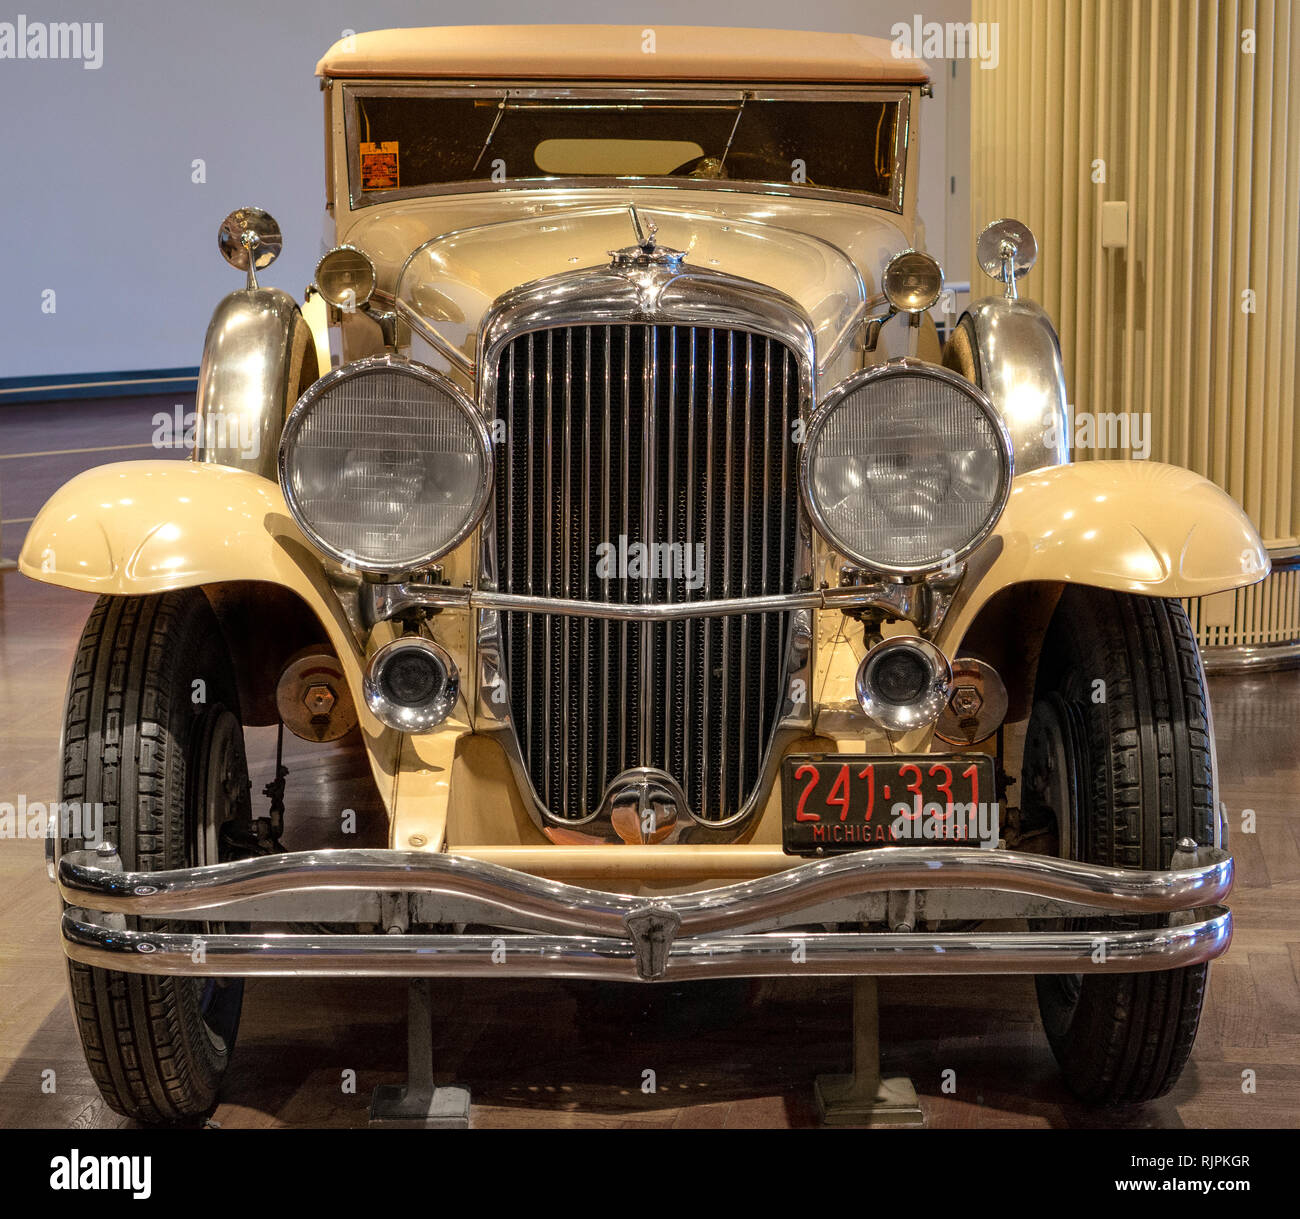 Dearborn, MI / USA - 04.21.2018 : The 1931 Duesenberg Model J at the Henry Ford Museum Stock Photo